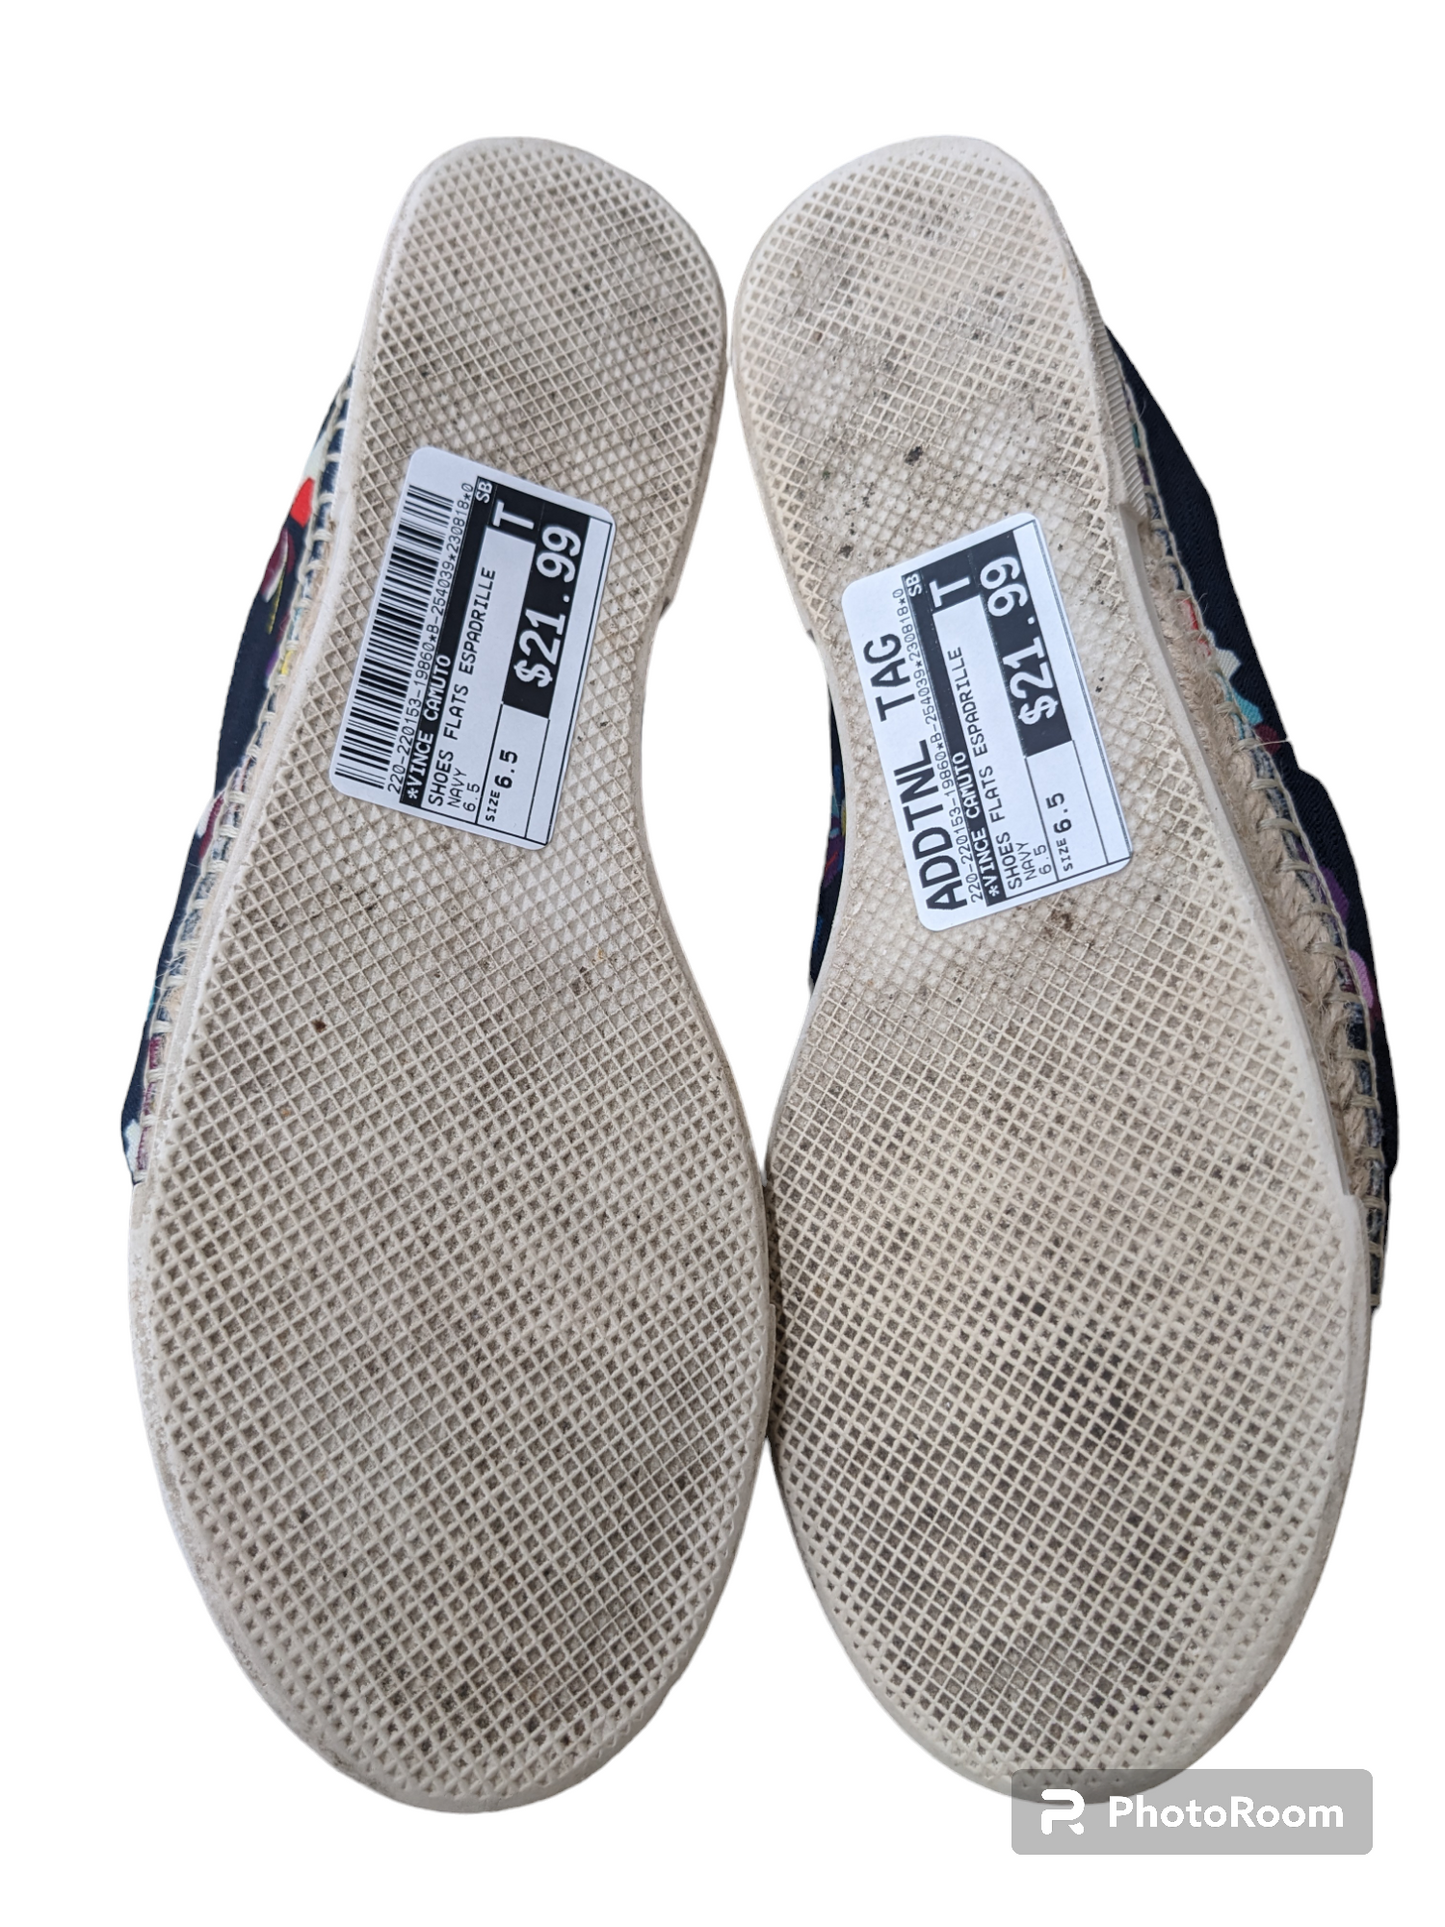 Shoes Flats Espadrille By Vince Camuto  Size: 6.5